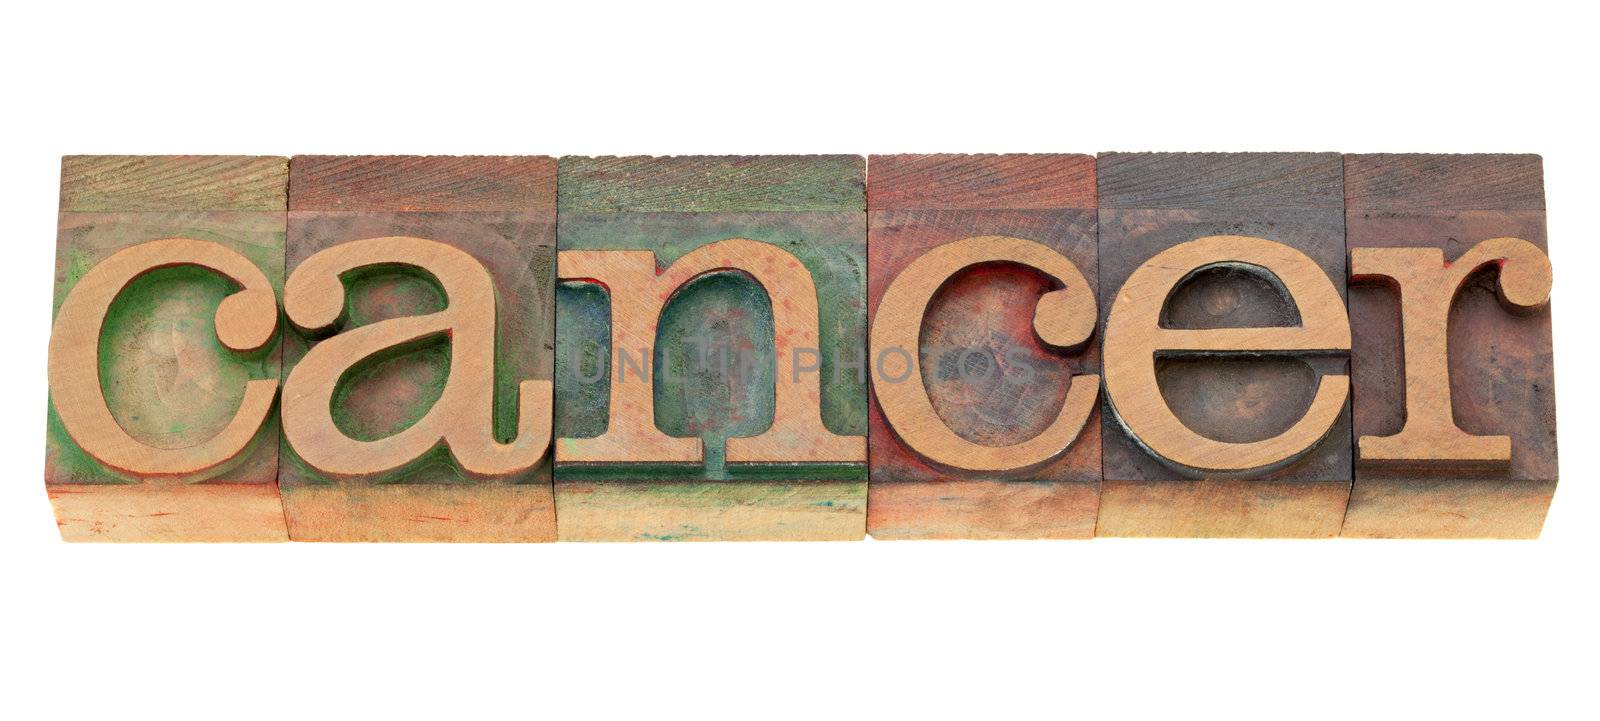 cancer - health problem - isolated word in vintage wood letterpress printing blocks